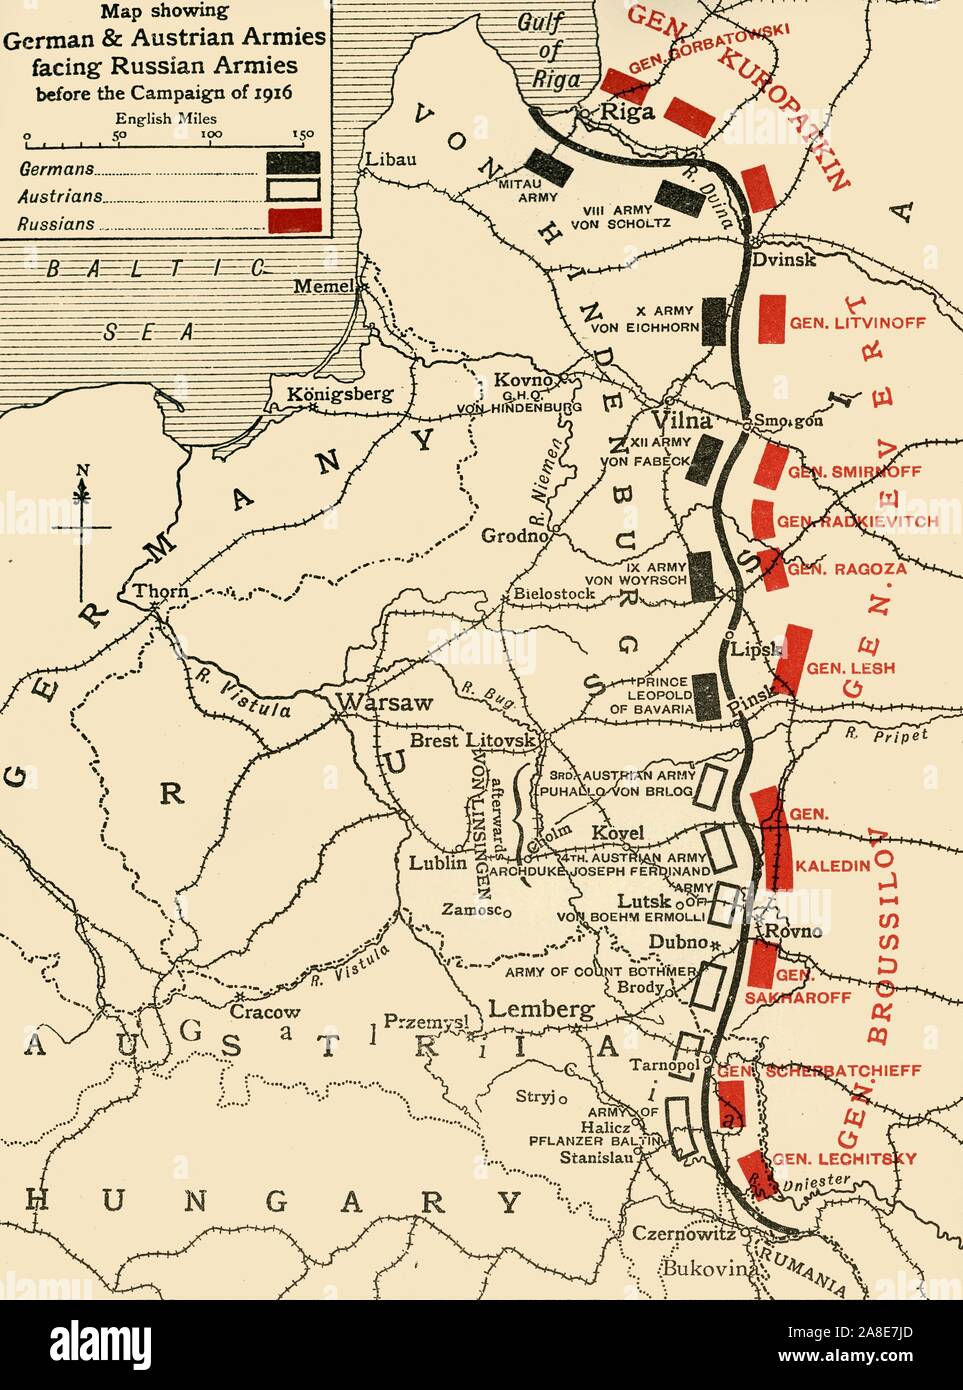 'Map showing German &amp; Austrian Armies facing Russian Armies before the Campaign of 1916', (c1920). Positions of the adversarial armies in eastern Europe during the First World War. From &quot;The Great World War: A History&quot;, Volume VI, edited by Frank A Mumby. [The Gresham Publishing Company Ltd, London, c1920] Stock Photo